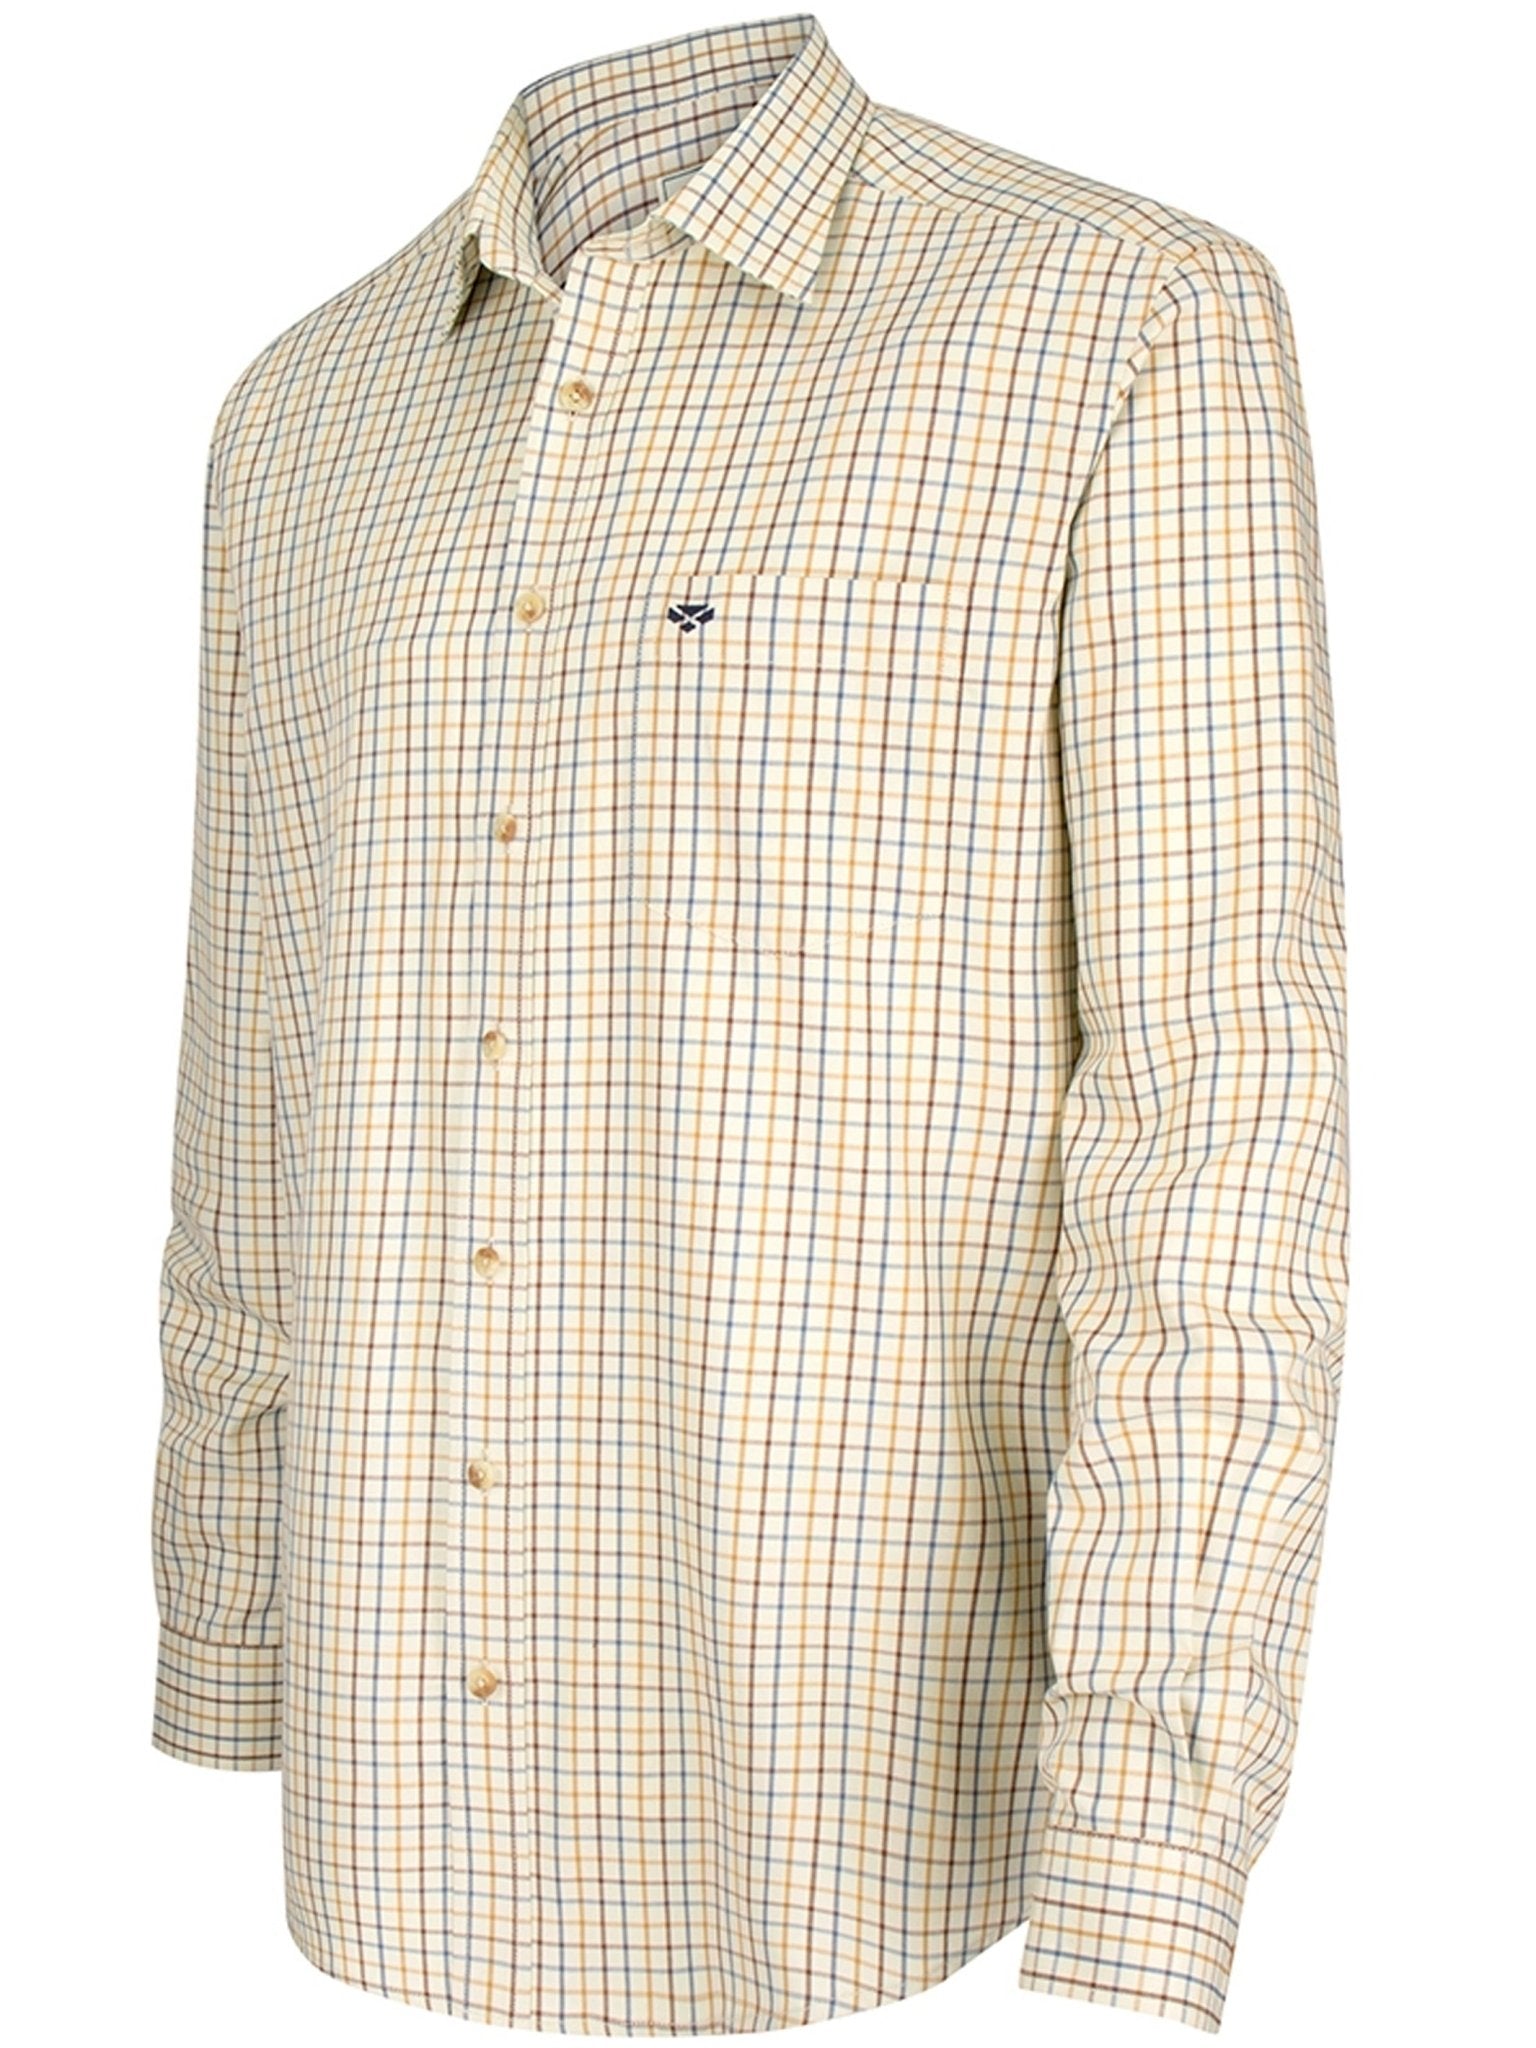 4elementsclothingHoggs of FifeHoggs of Fife - Mens Shirt / Long sleeve check shirt - country casual style - Inverness shirtShirtINVS/BG/1